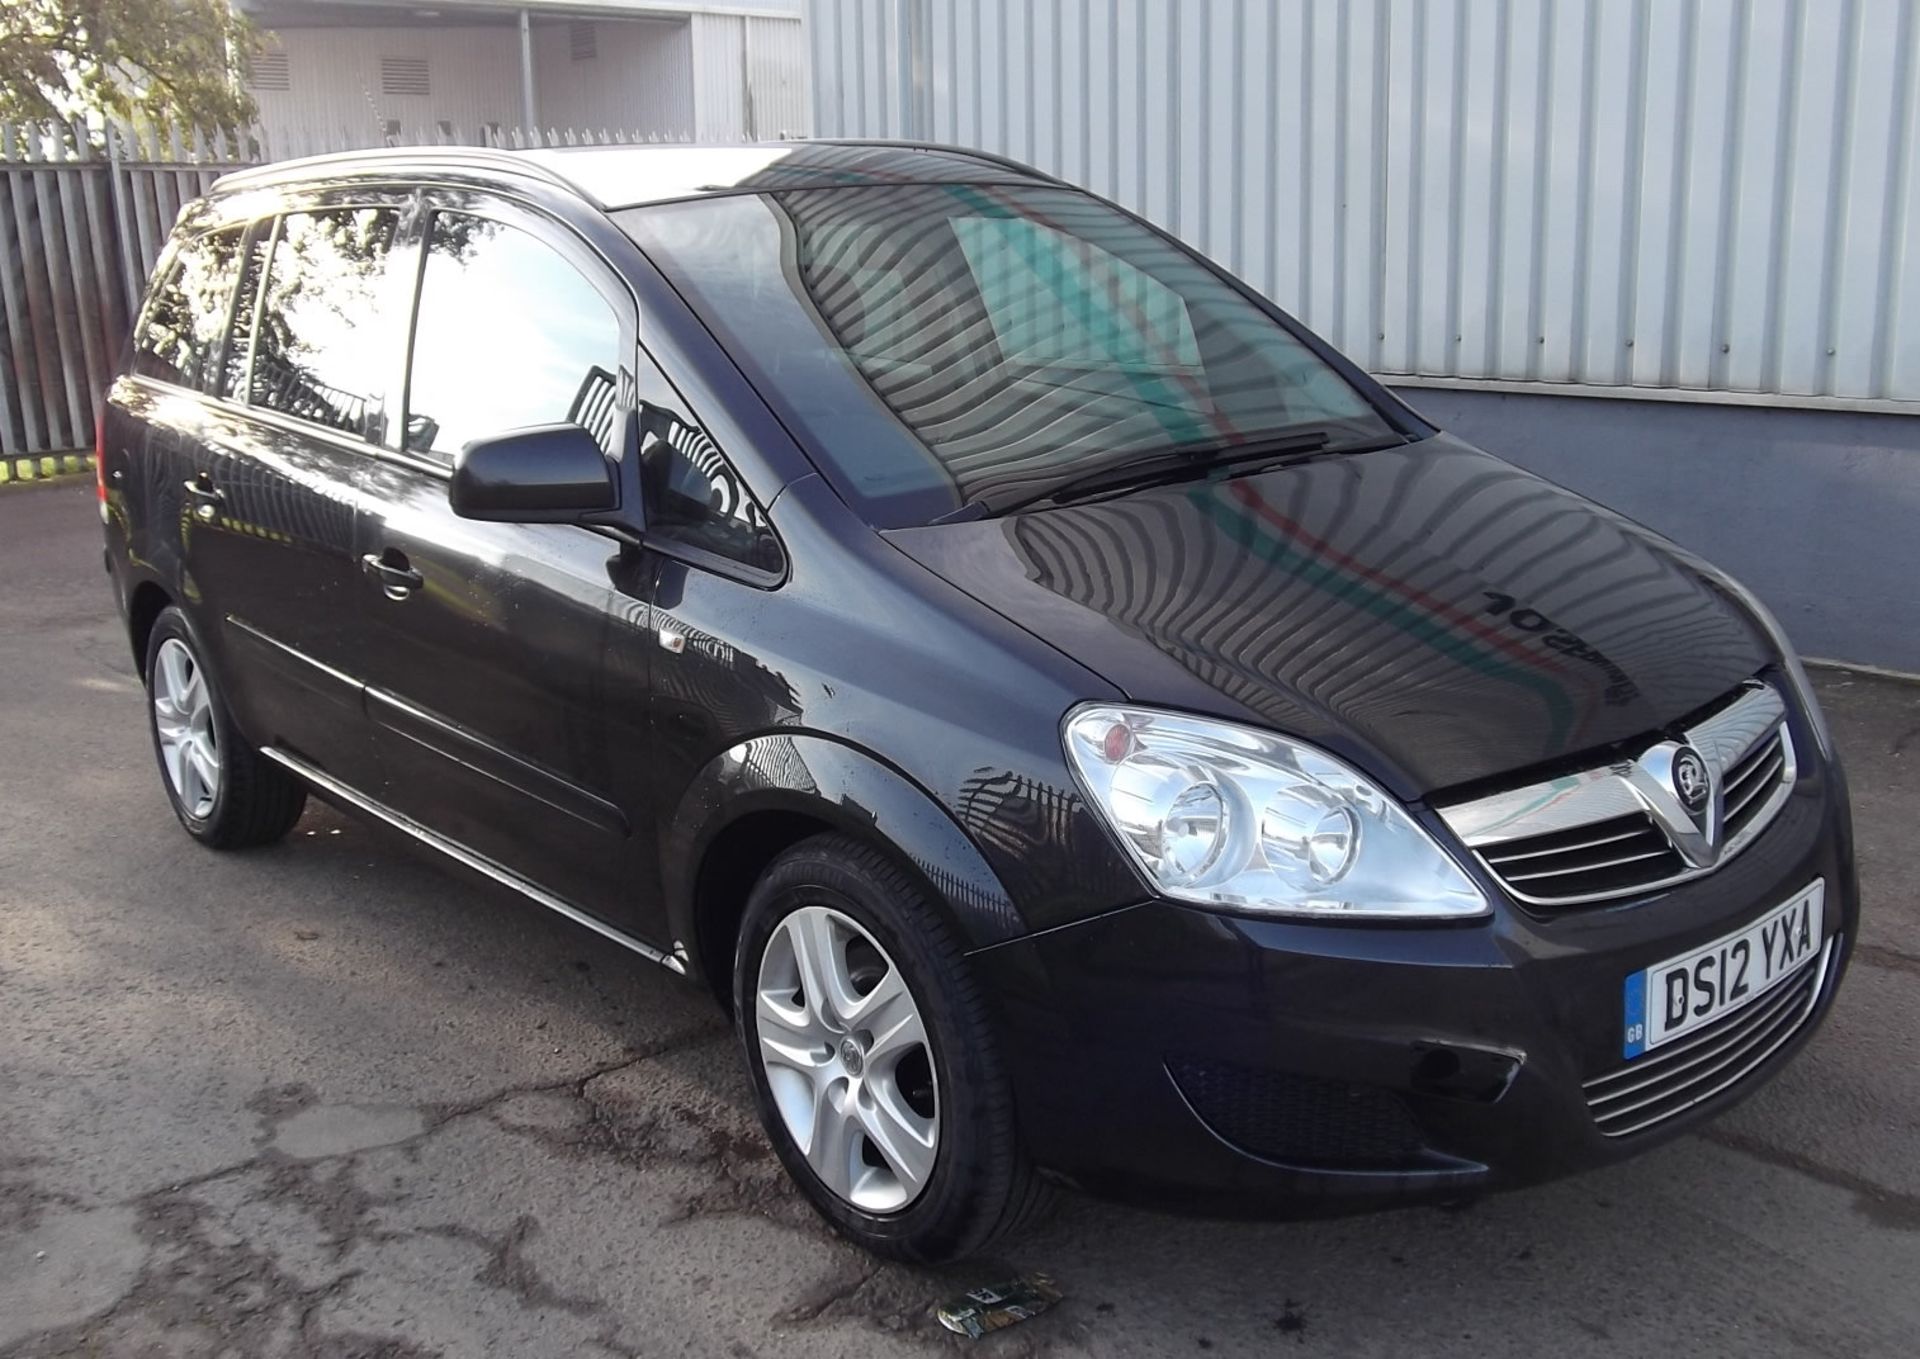 2012 Vauxhall Zafira 1.7 Cdti Exclusive 5 Door MPV - CL505 - NO VAT ON THE HAMMER - Location: Corby,